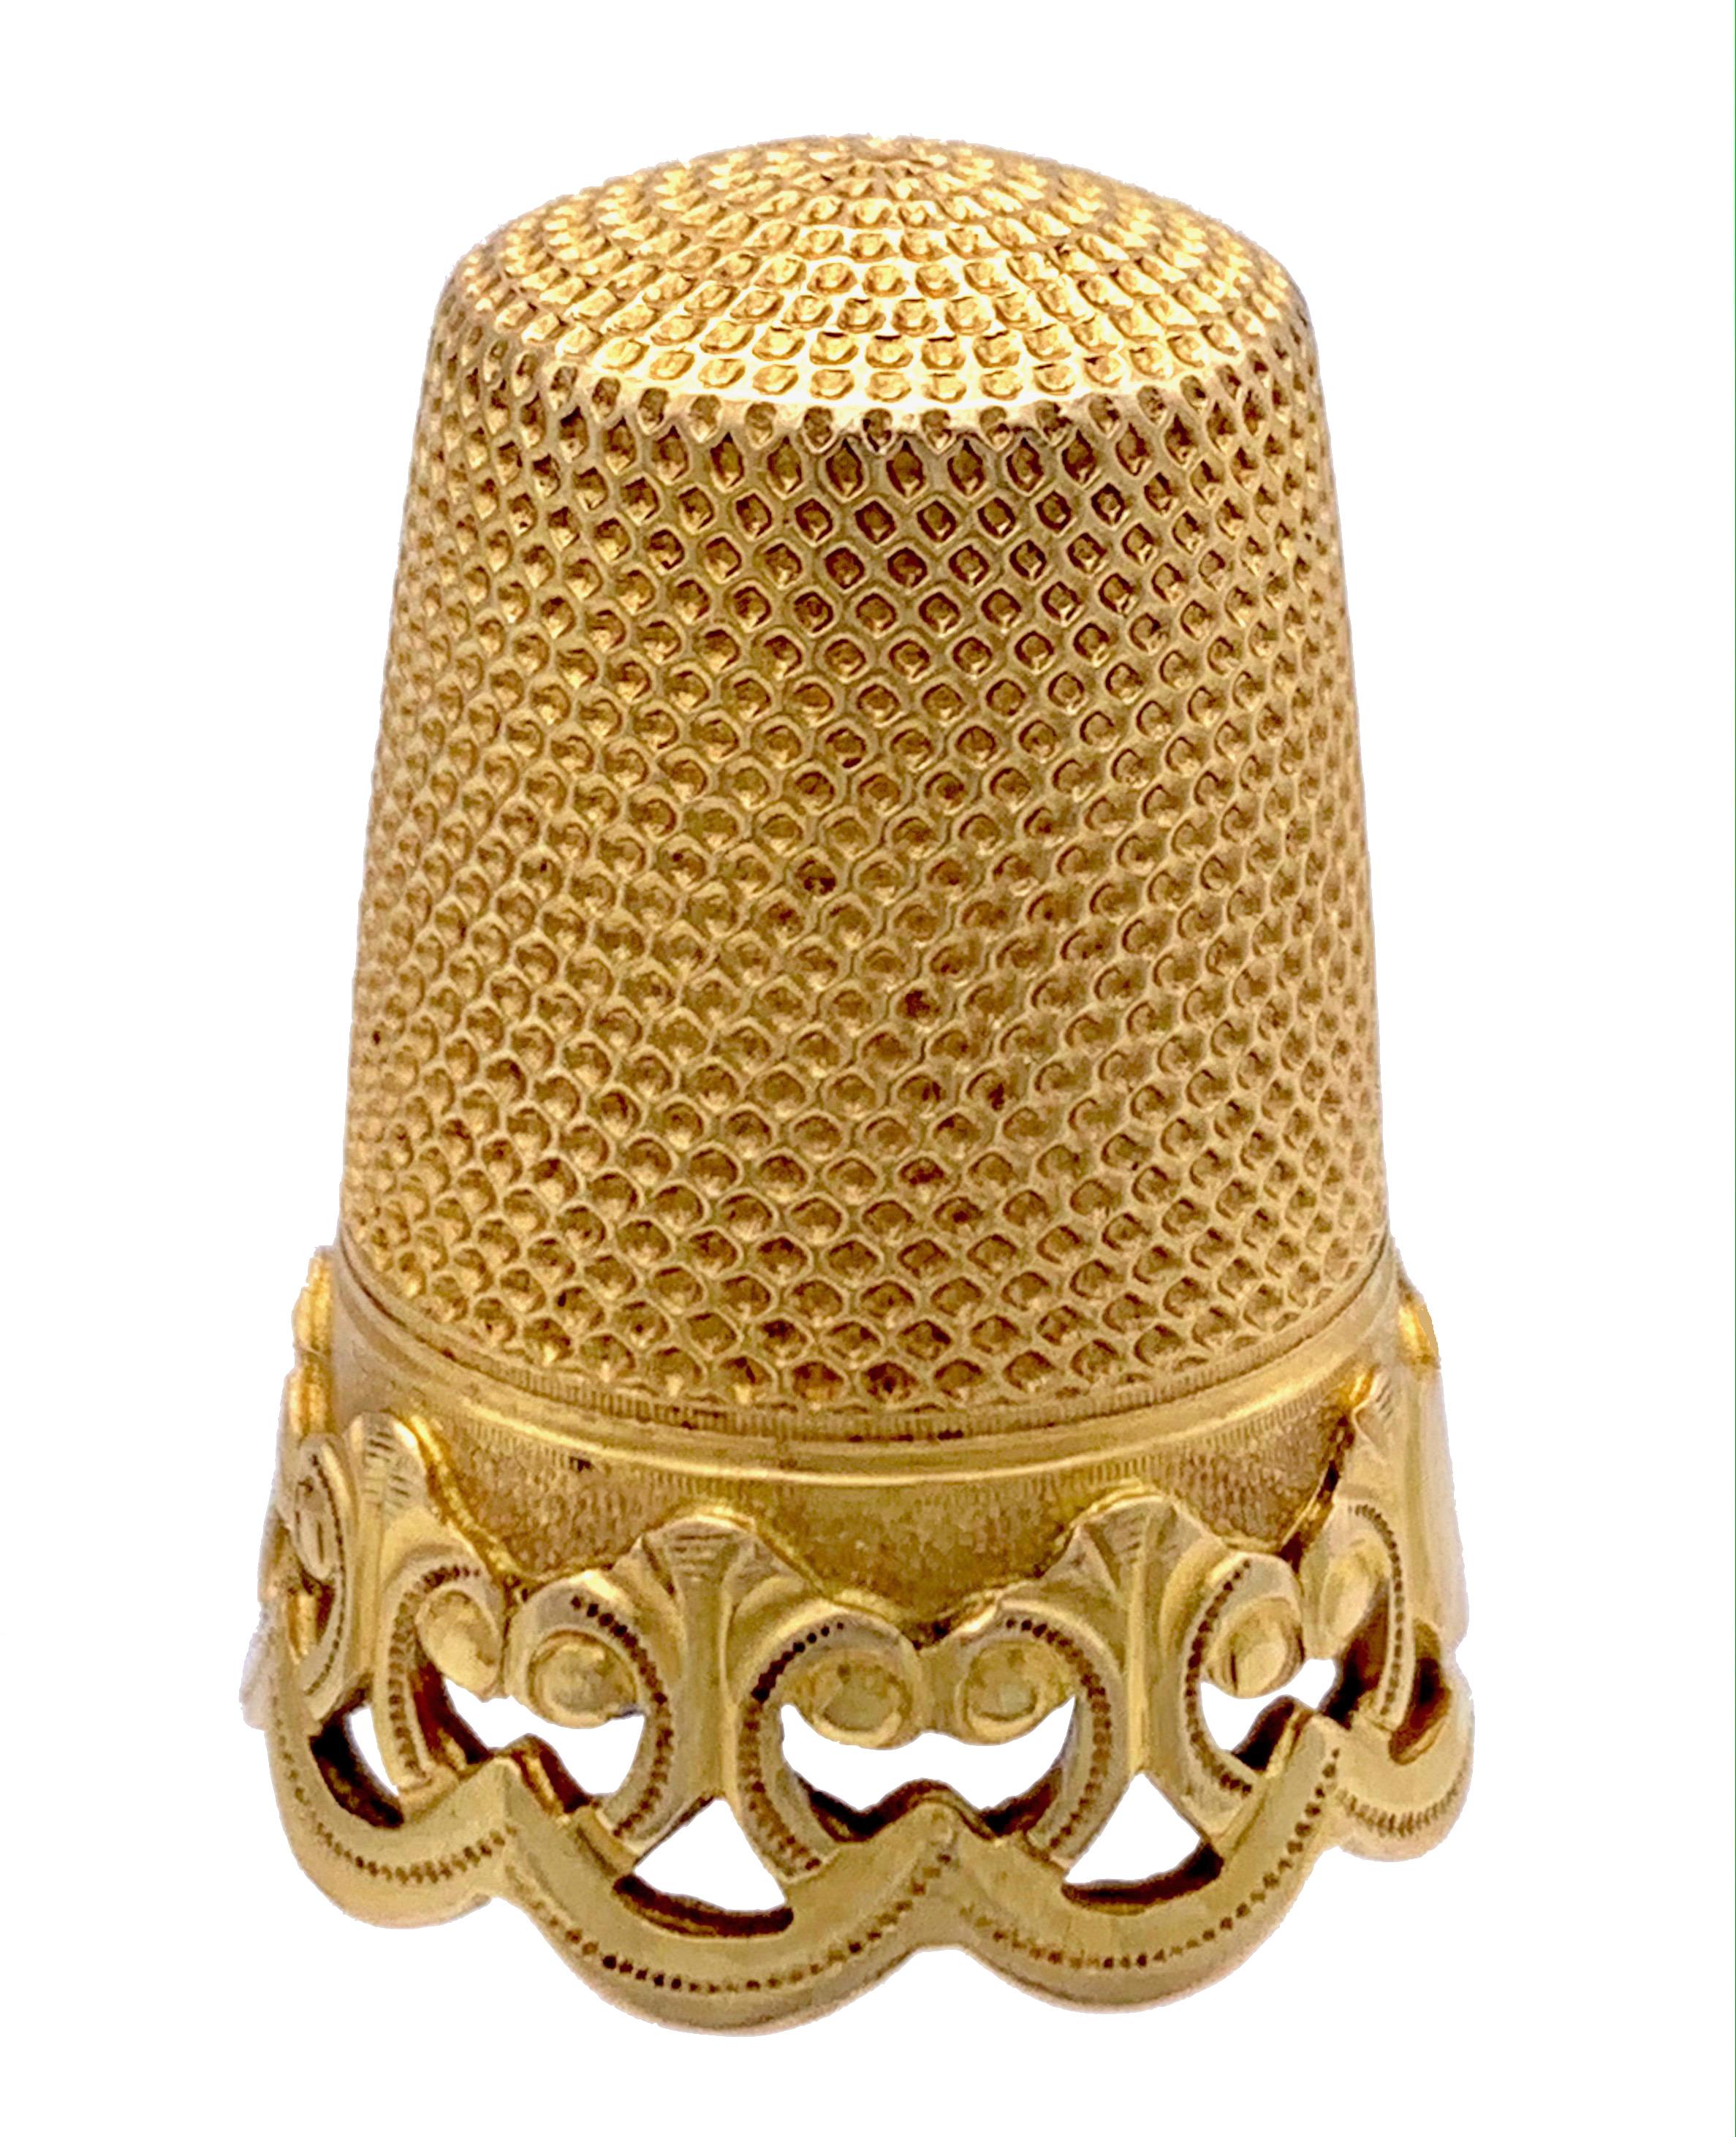 Beautifully chiseled and engraved victorian thimble crafted out oi 14 karat gold around 186071870.